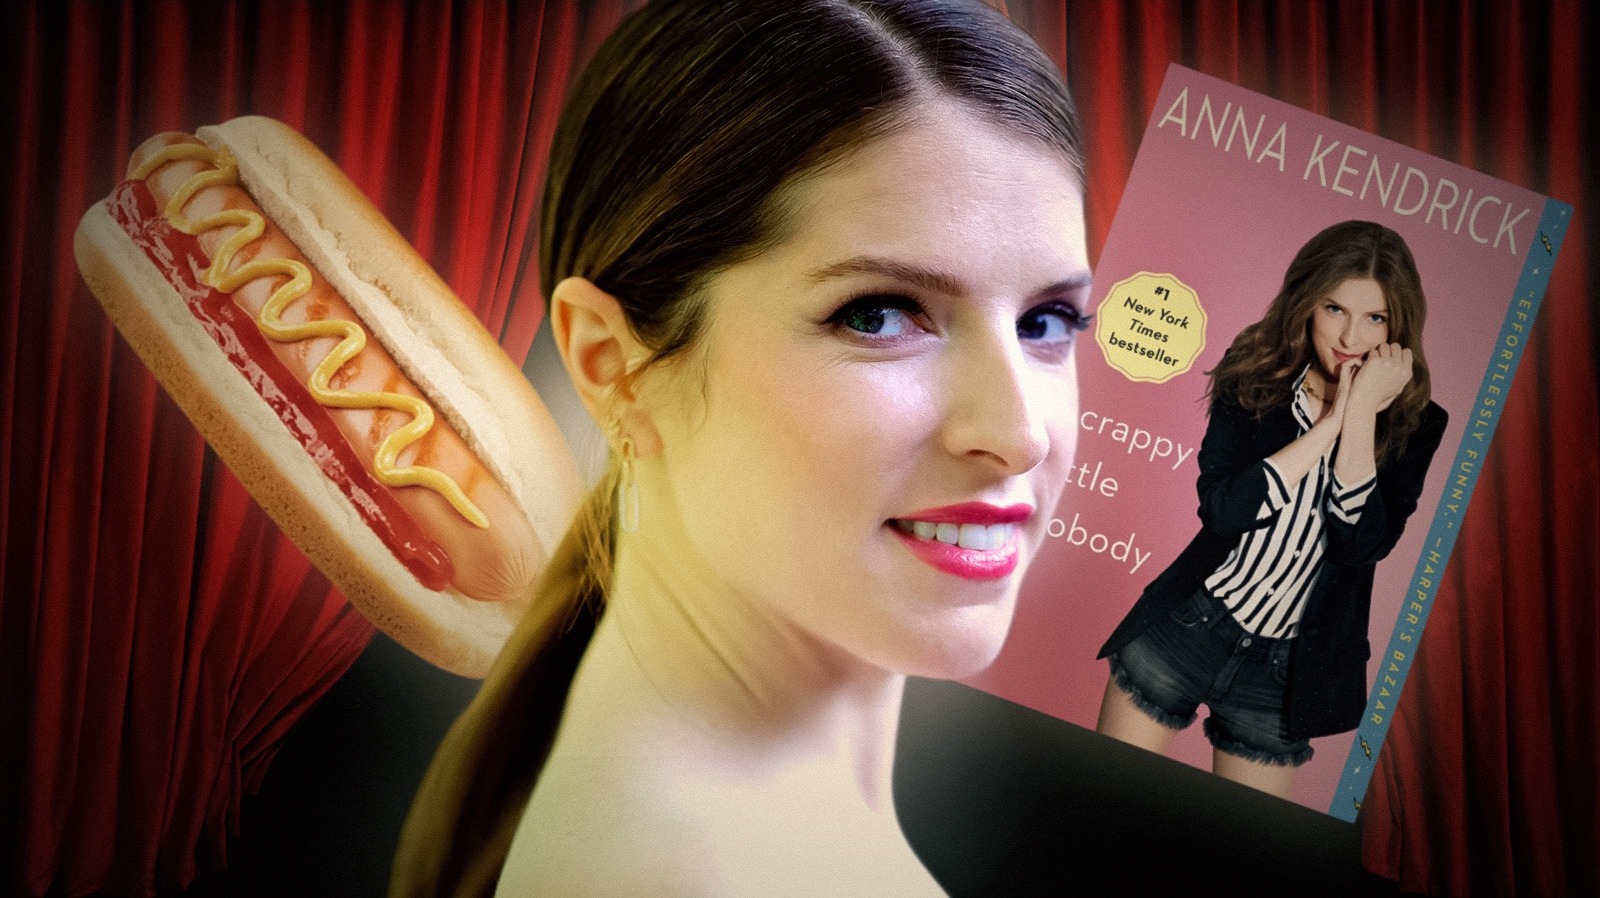 colette lally recommends Anna Kendrick Sex Stories